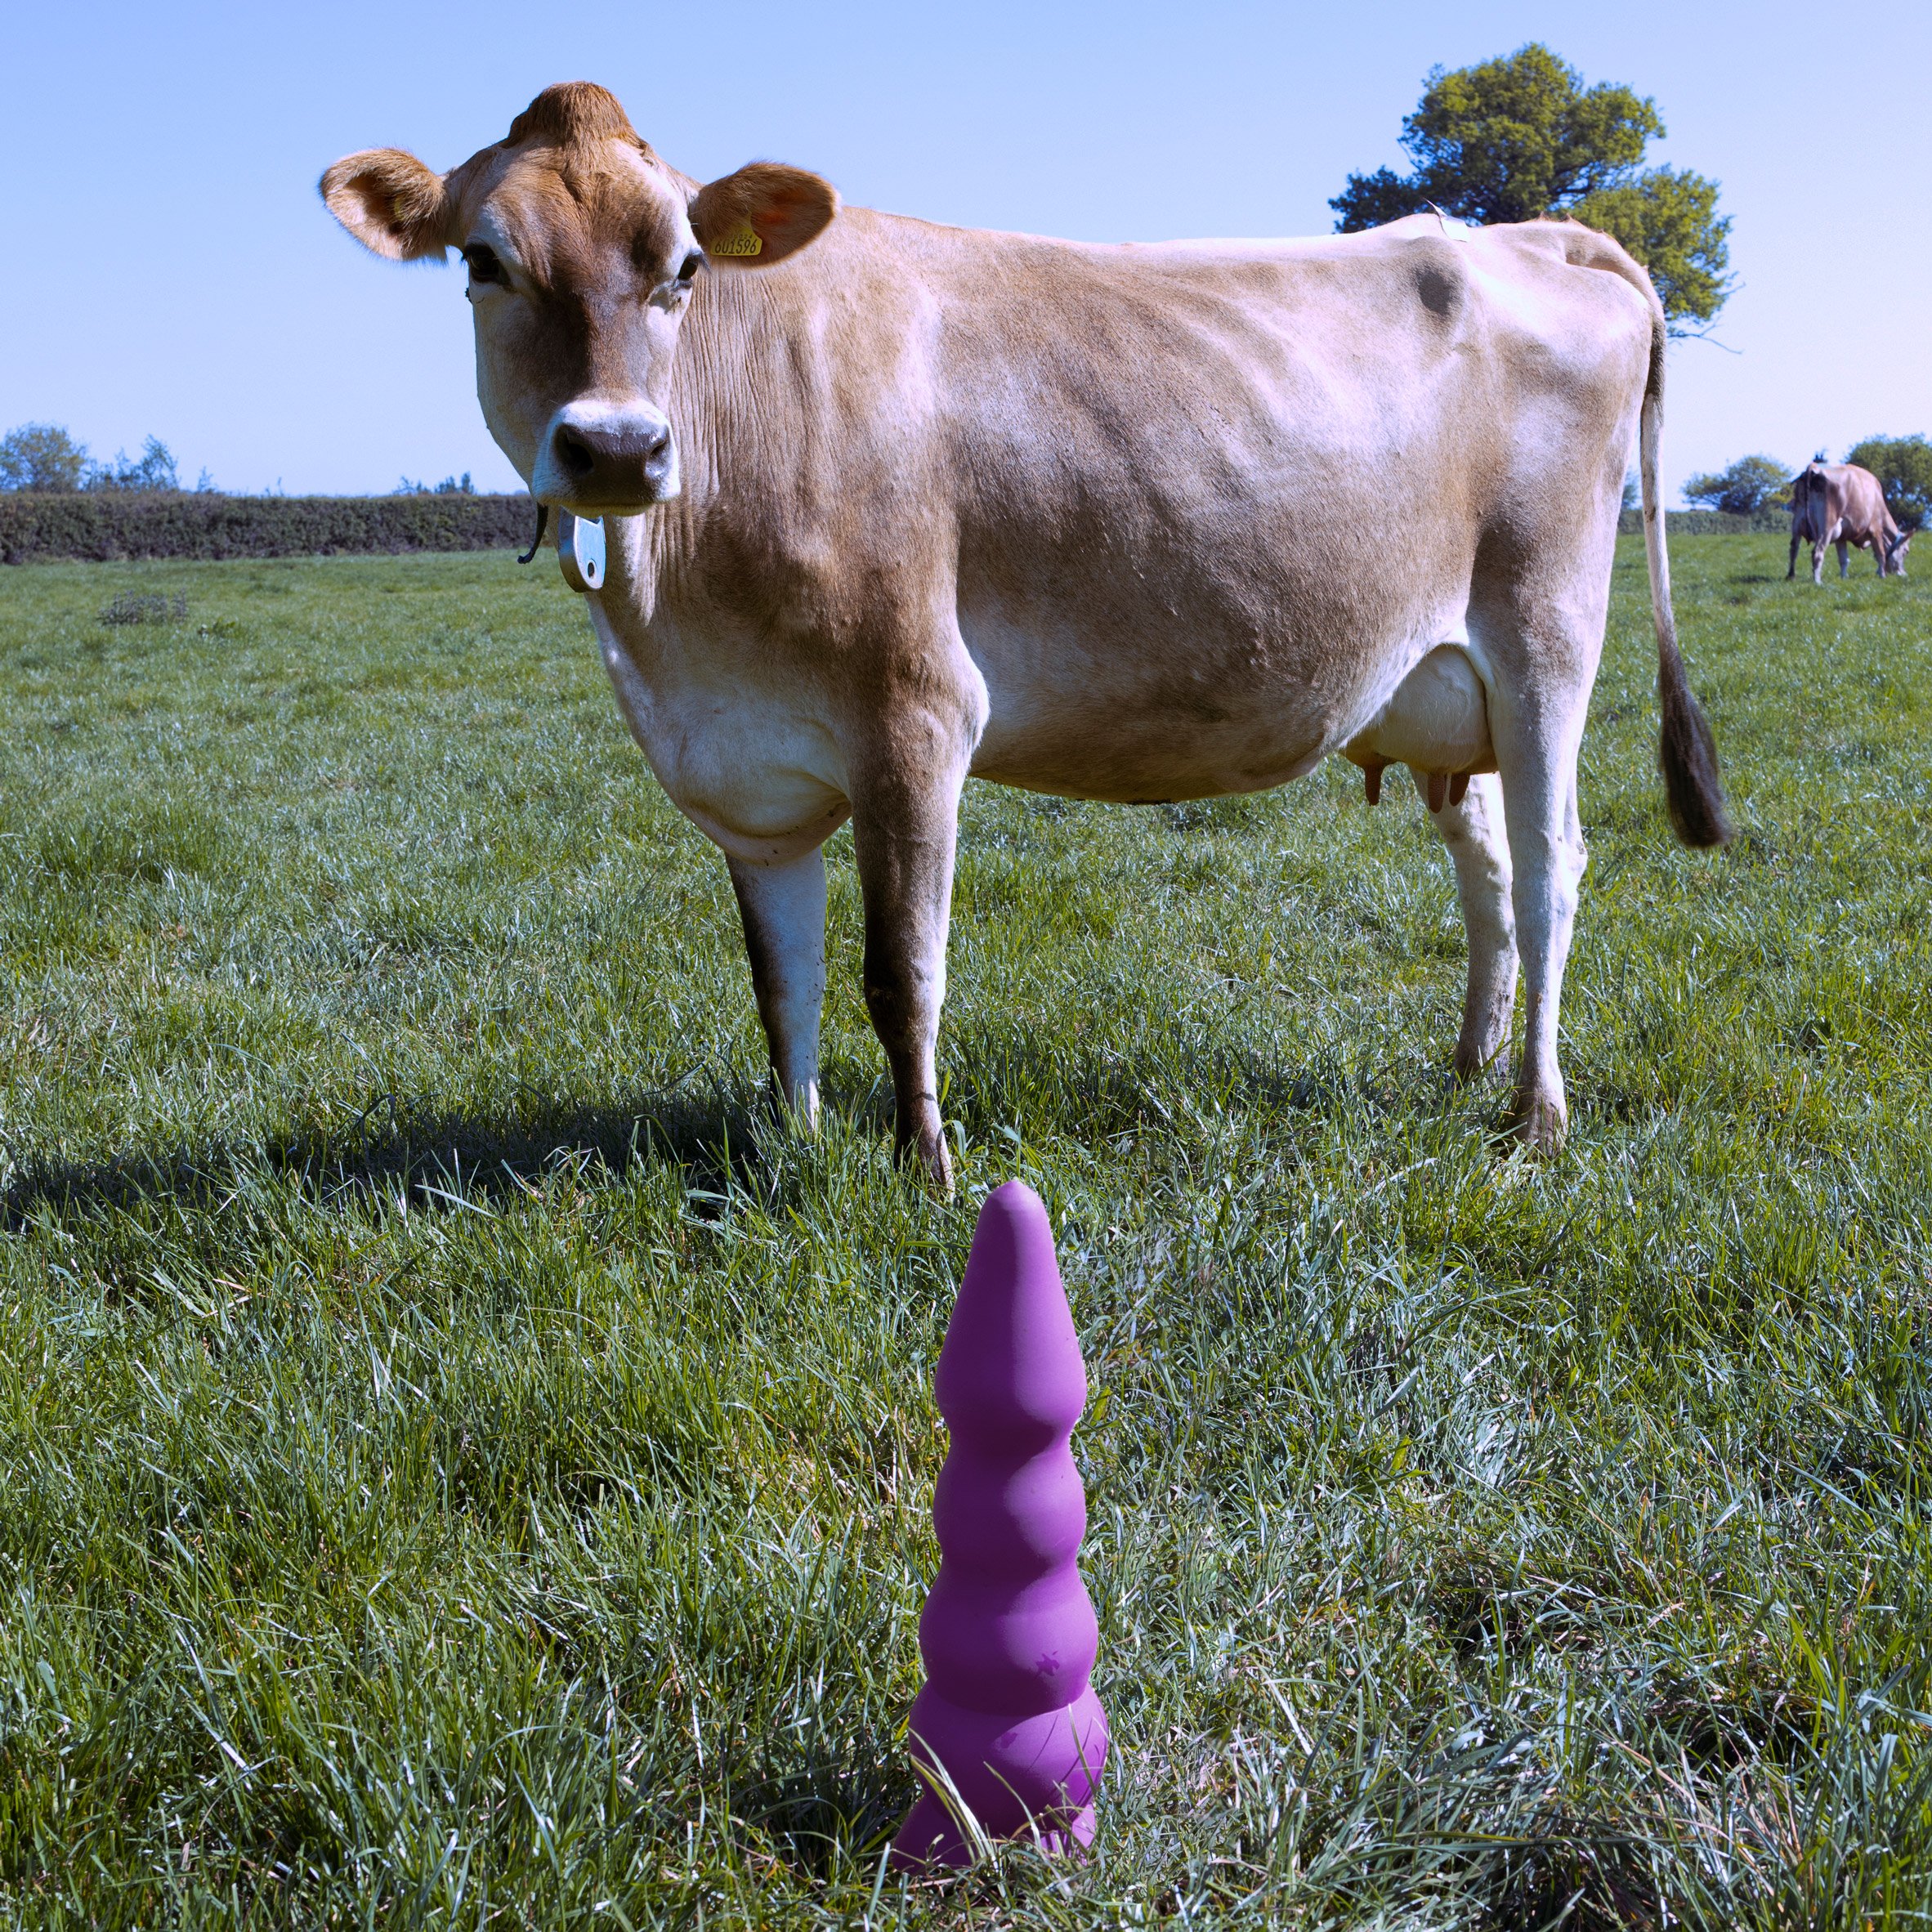 Ece Tan designs sex toys for cows to make farming practices more pleasurable pic pic